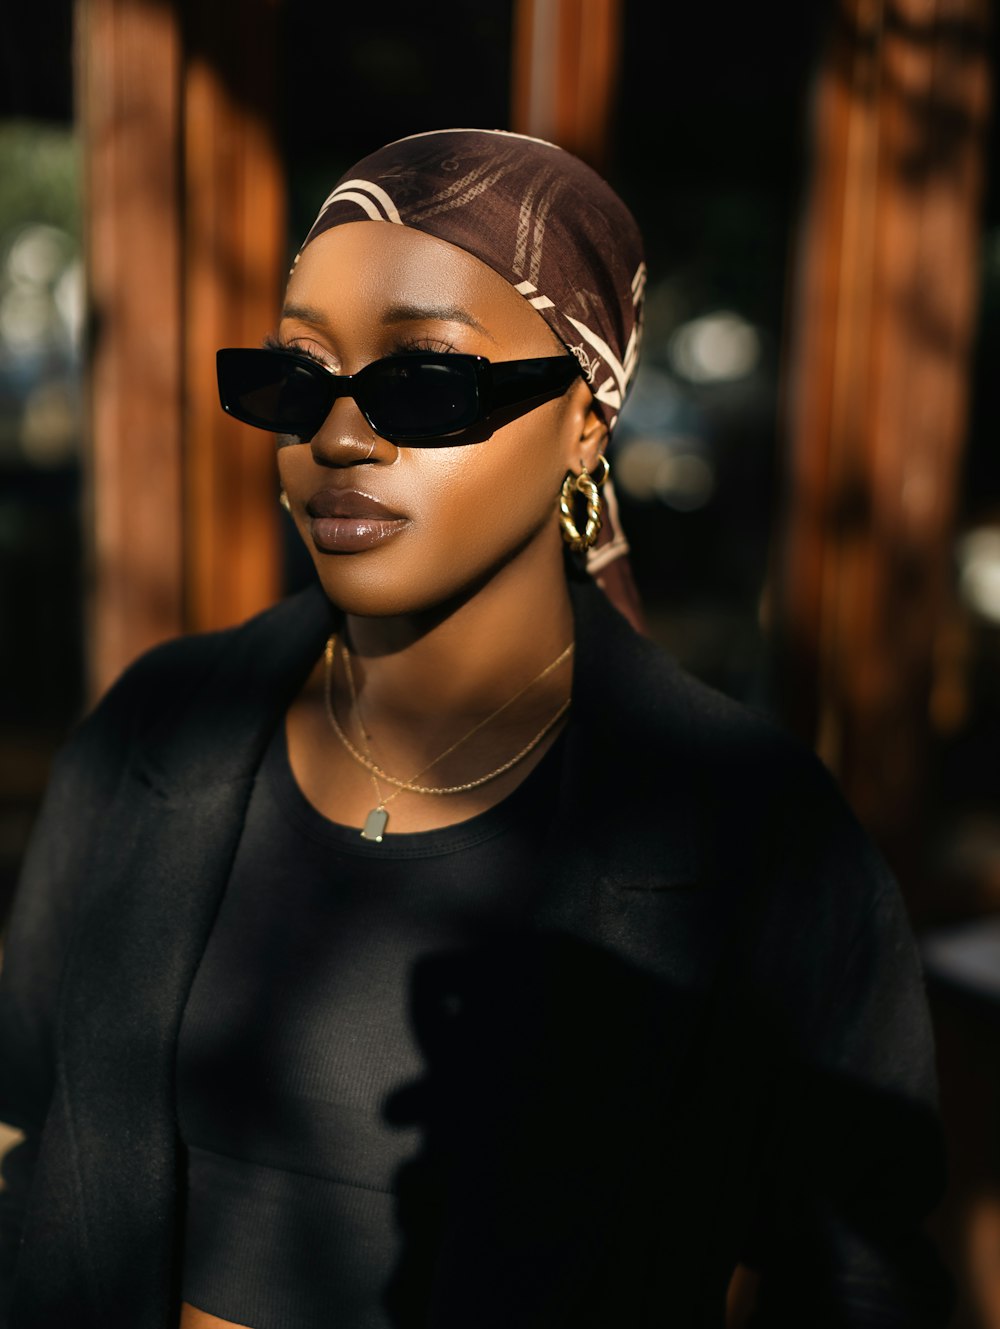 a woman wearing sunglasses and a head scarf